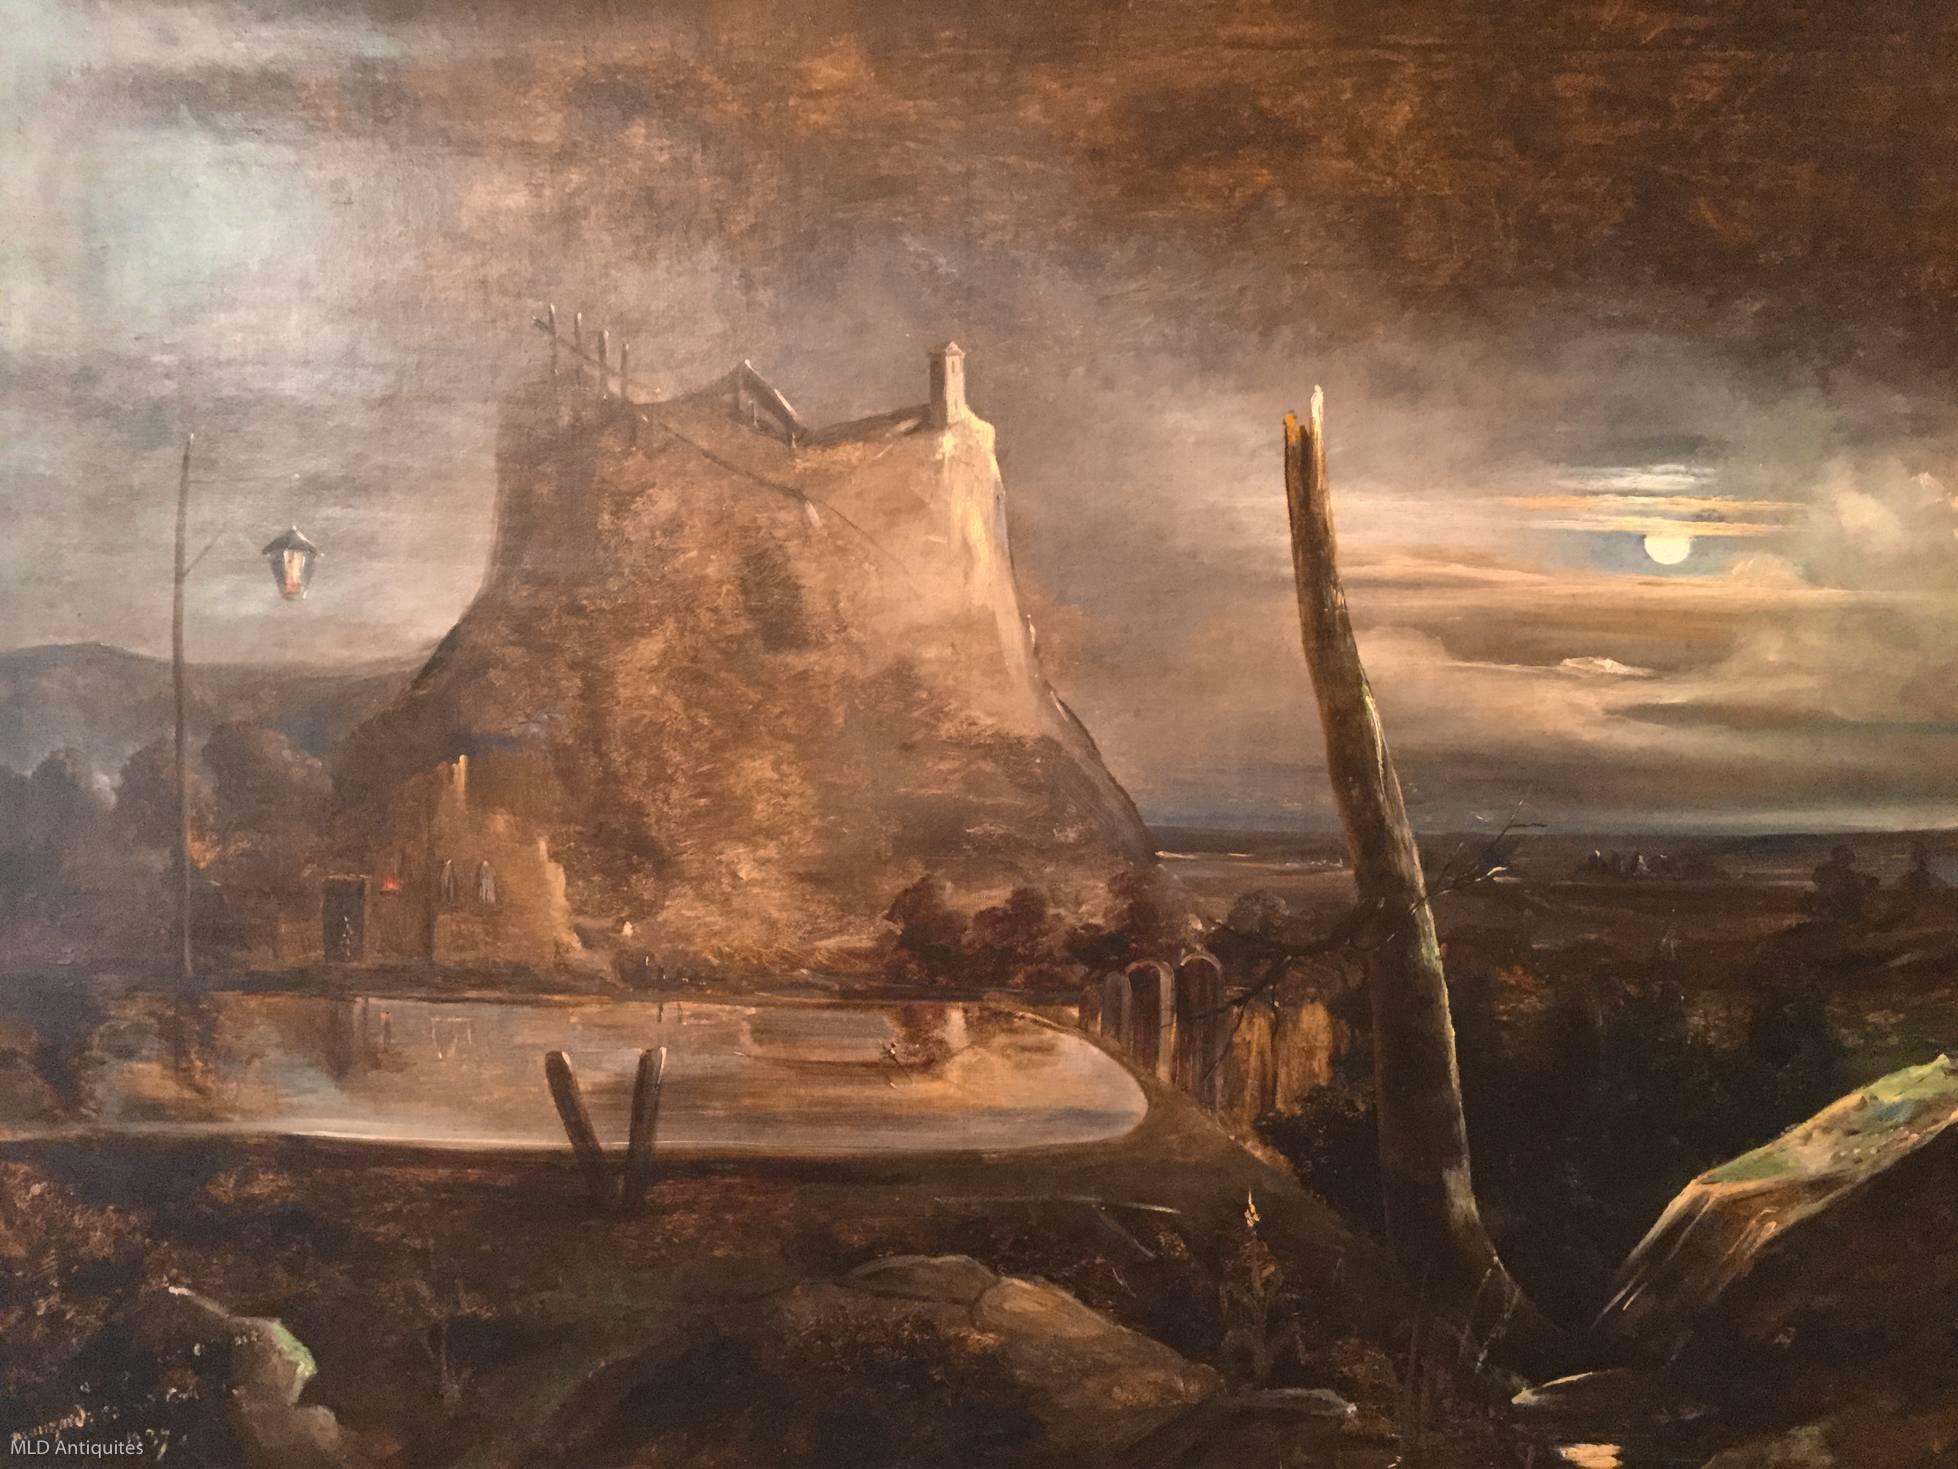 Restauration Oil on Canvas an Imaginary Night-Landscape by Theodore Gudin, circa 1837